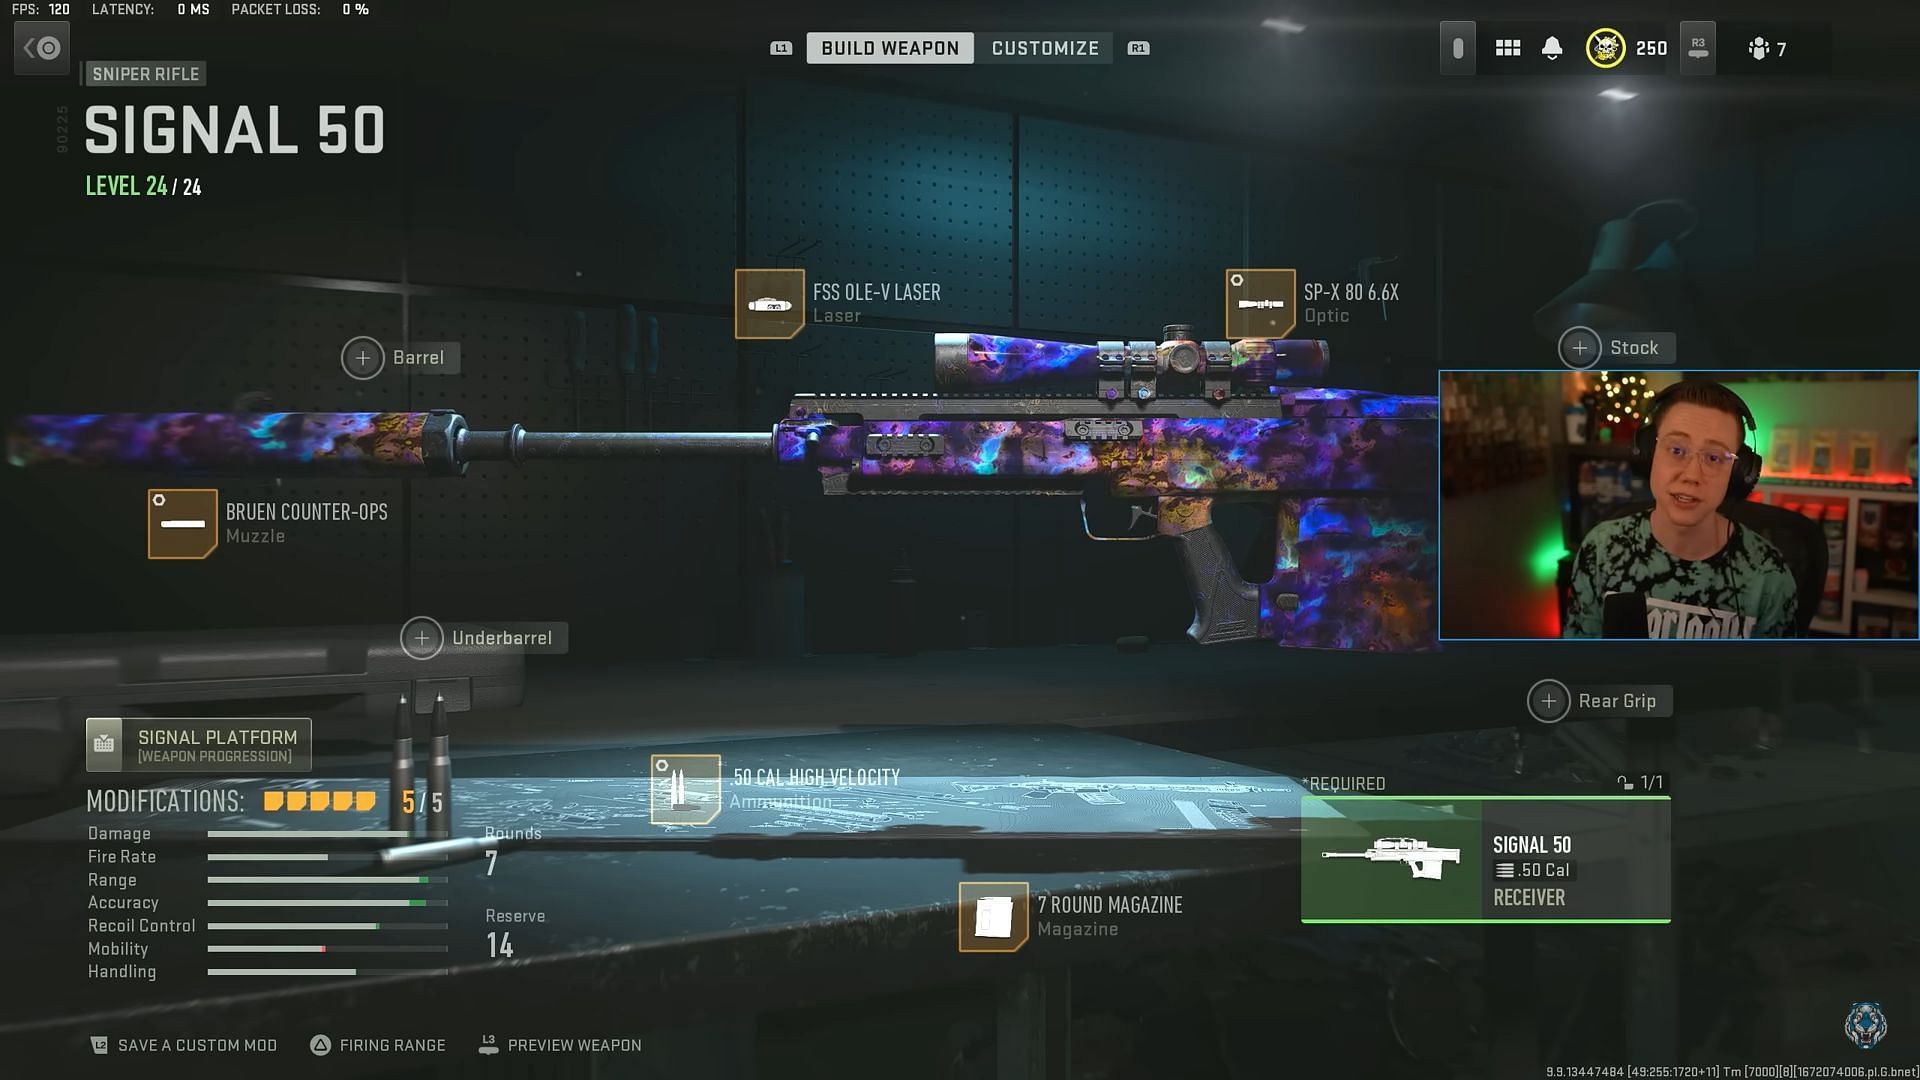 Signal 50 loadout recommended by WhosImmortal (Image via Activision and YouTube/WhosImmortal)